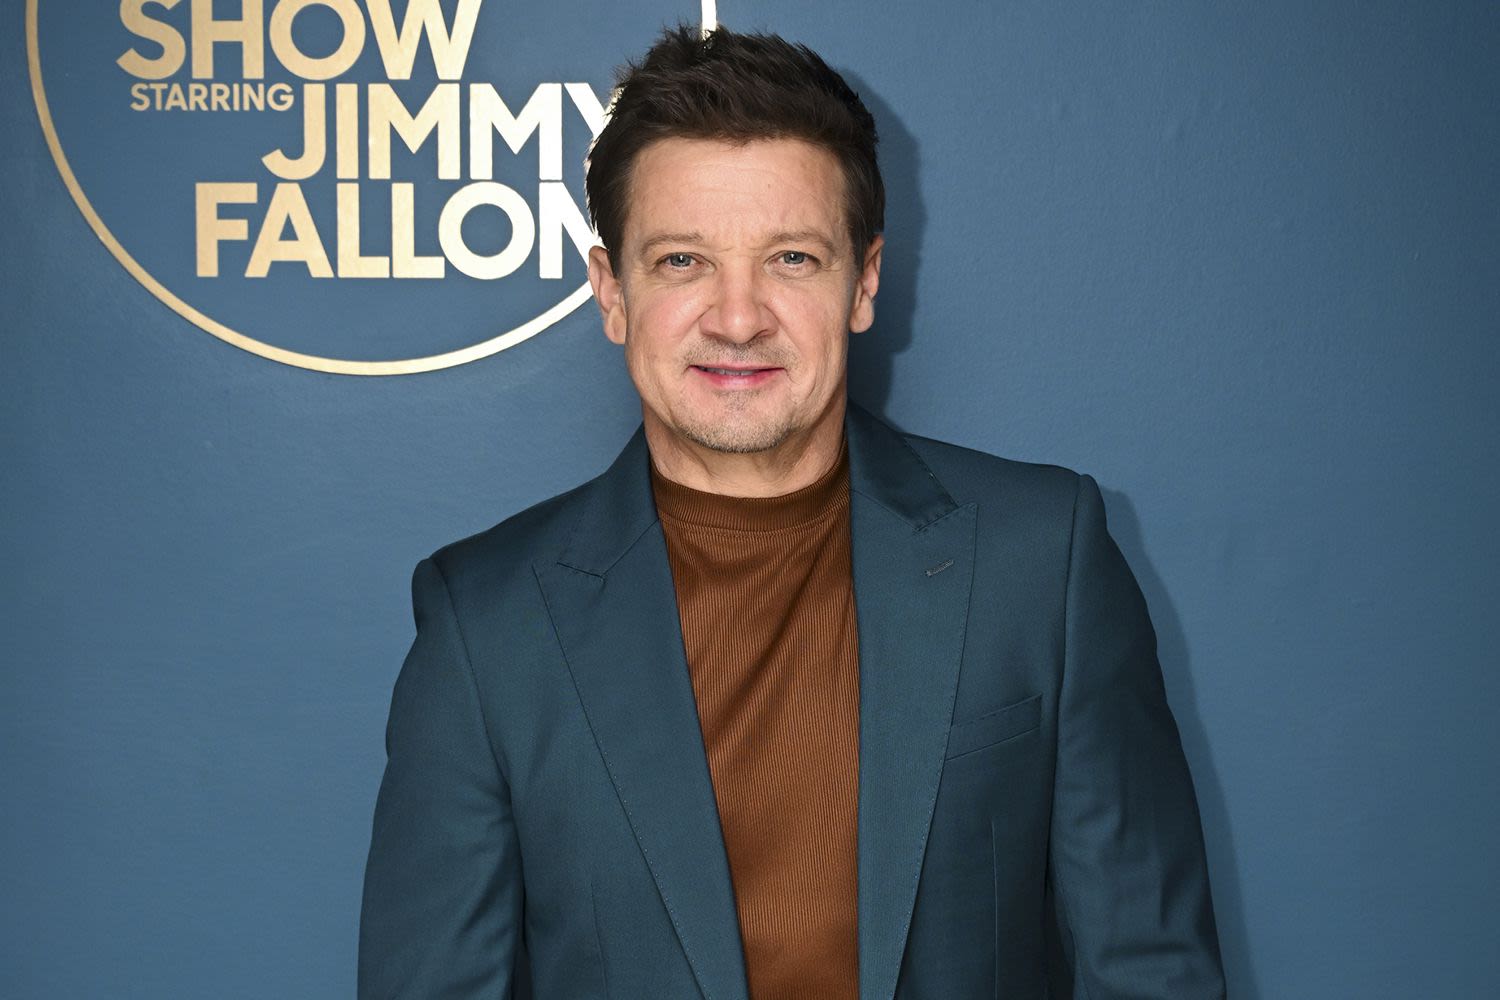 Jeremy Renner Reflects on Near-Fatal Snowplow Accident: 'If I Didn't Breathe Then I Would Have Been Gone'